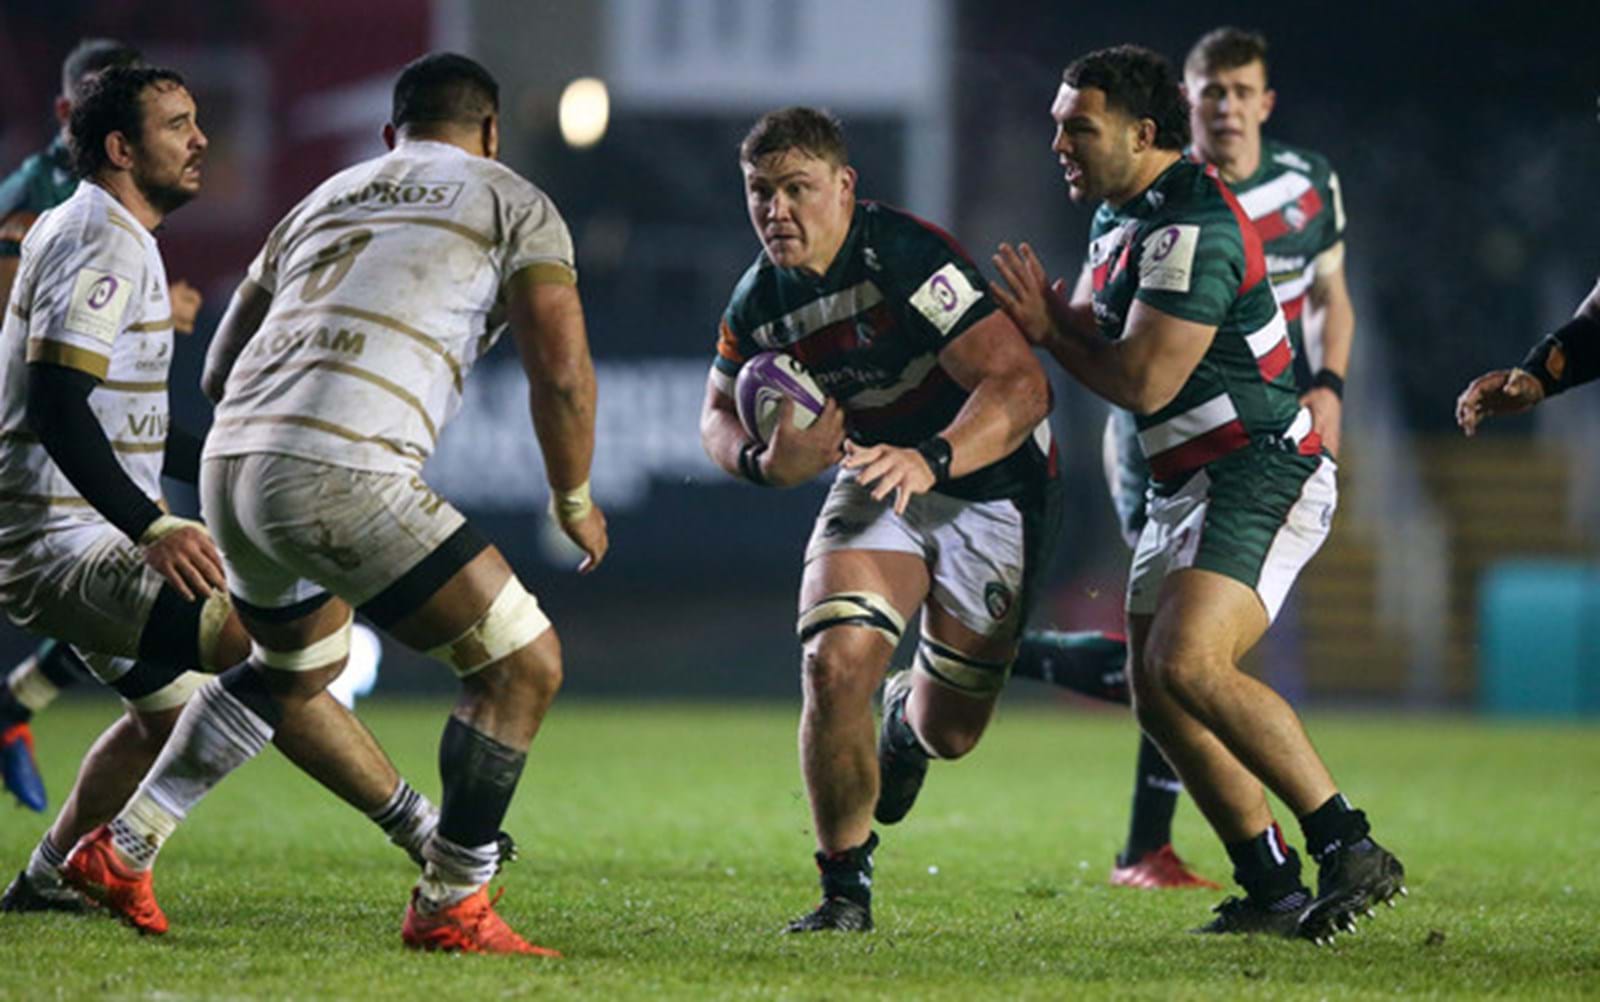 Sunset+Vine’s Newly-Formed Content Department Secures  European Professional Club Rugby (EPCR) Marketing Video Production Contract  